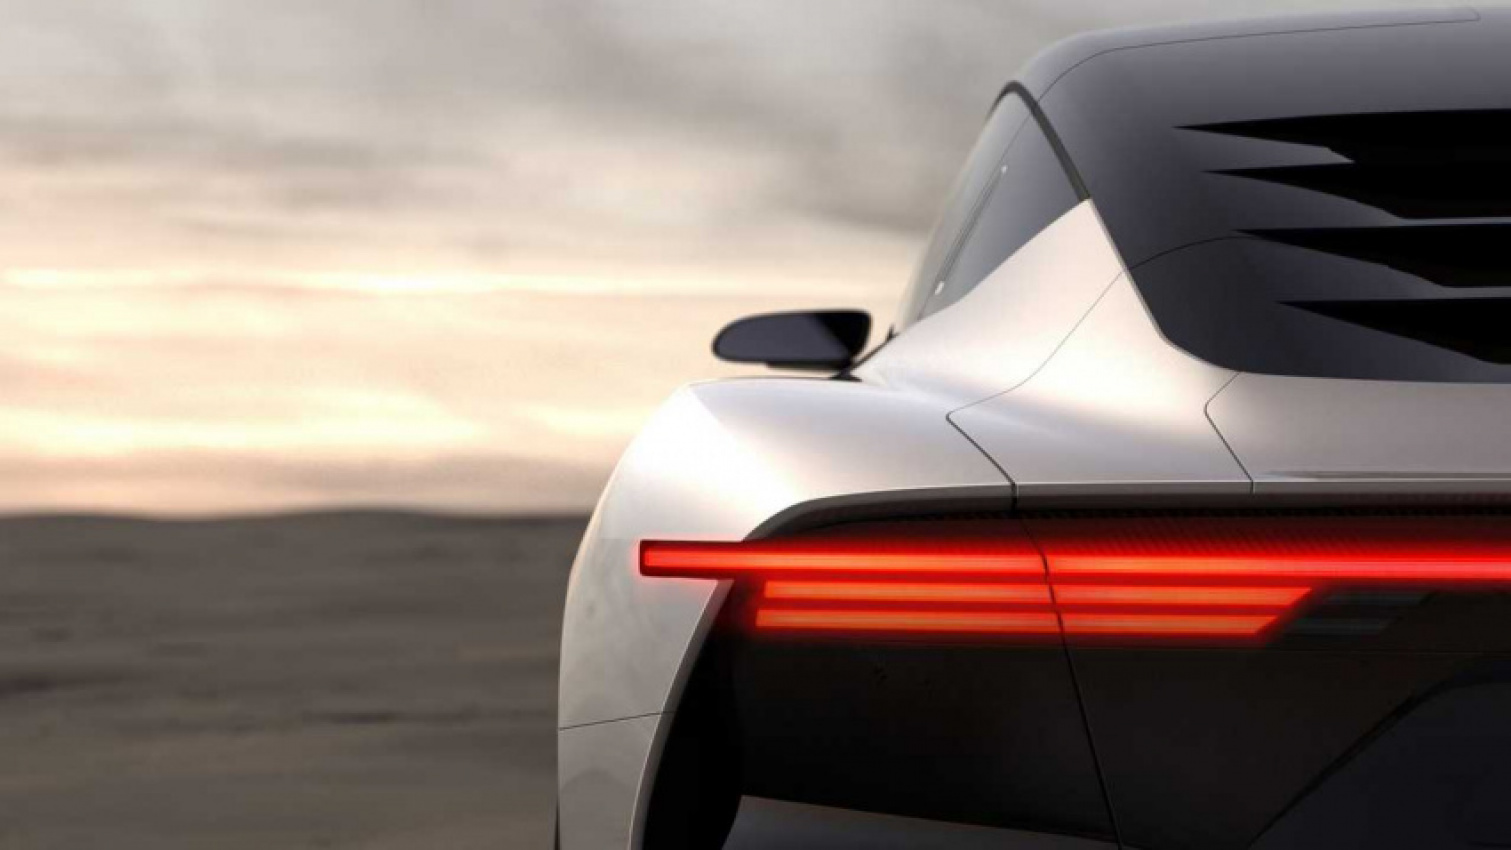 autos, cars, delorean, electric vehicle, evs, delorean's electric vehicle concept teased, will debut august 18